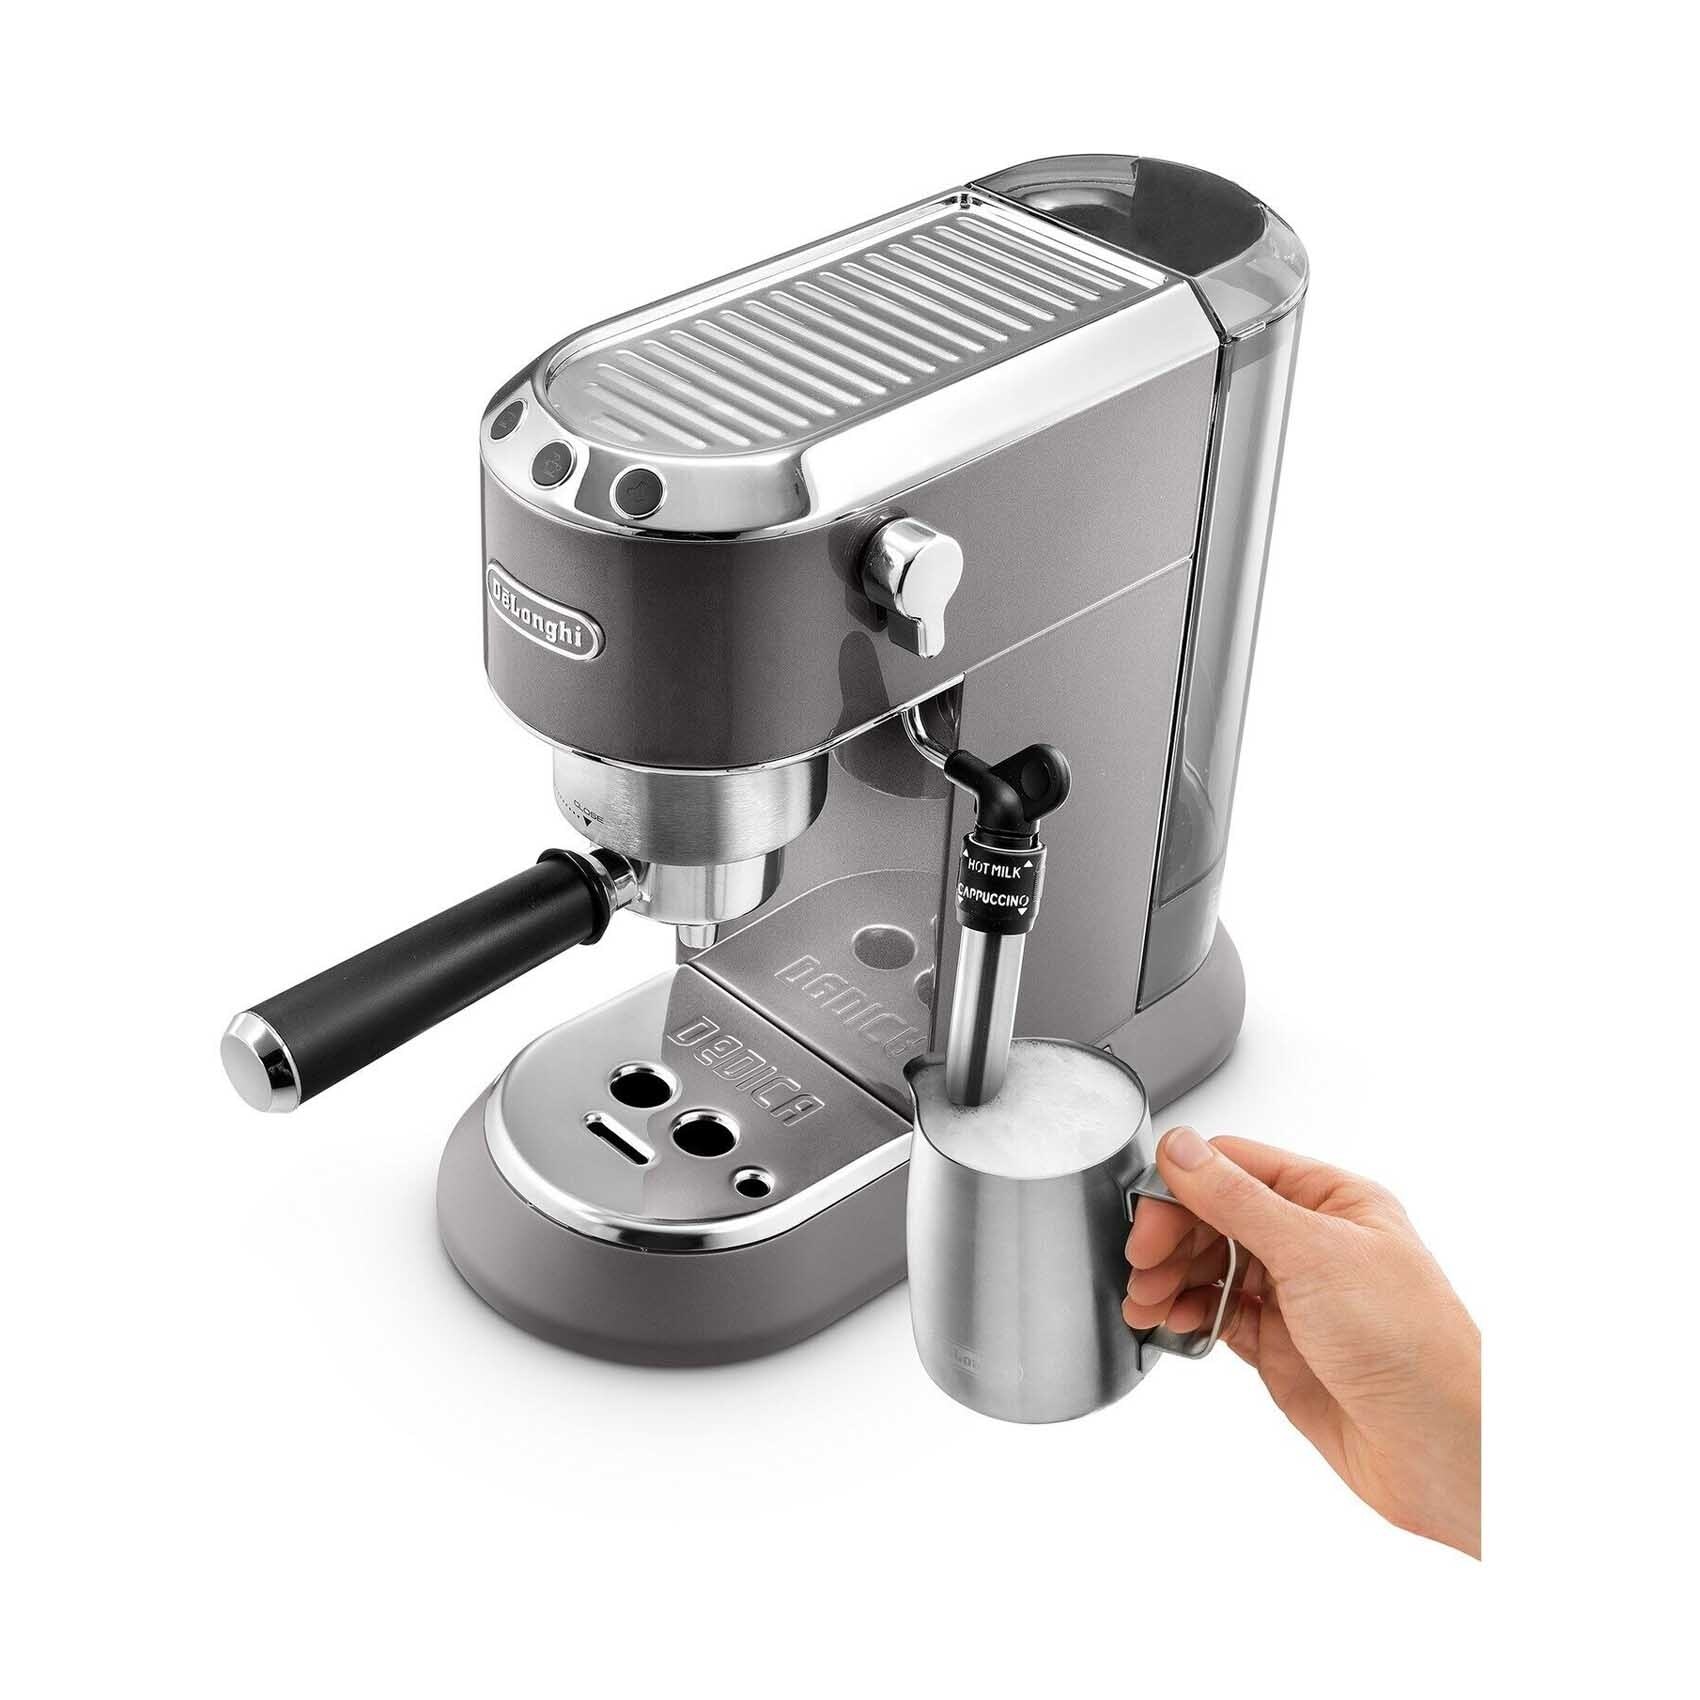 Where can I Find Delonghi descaling solution for coffee machine in Doha ? :  r/qatar